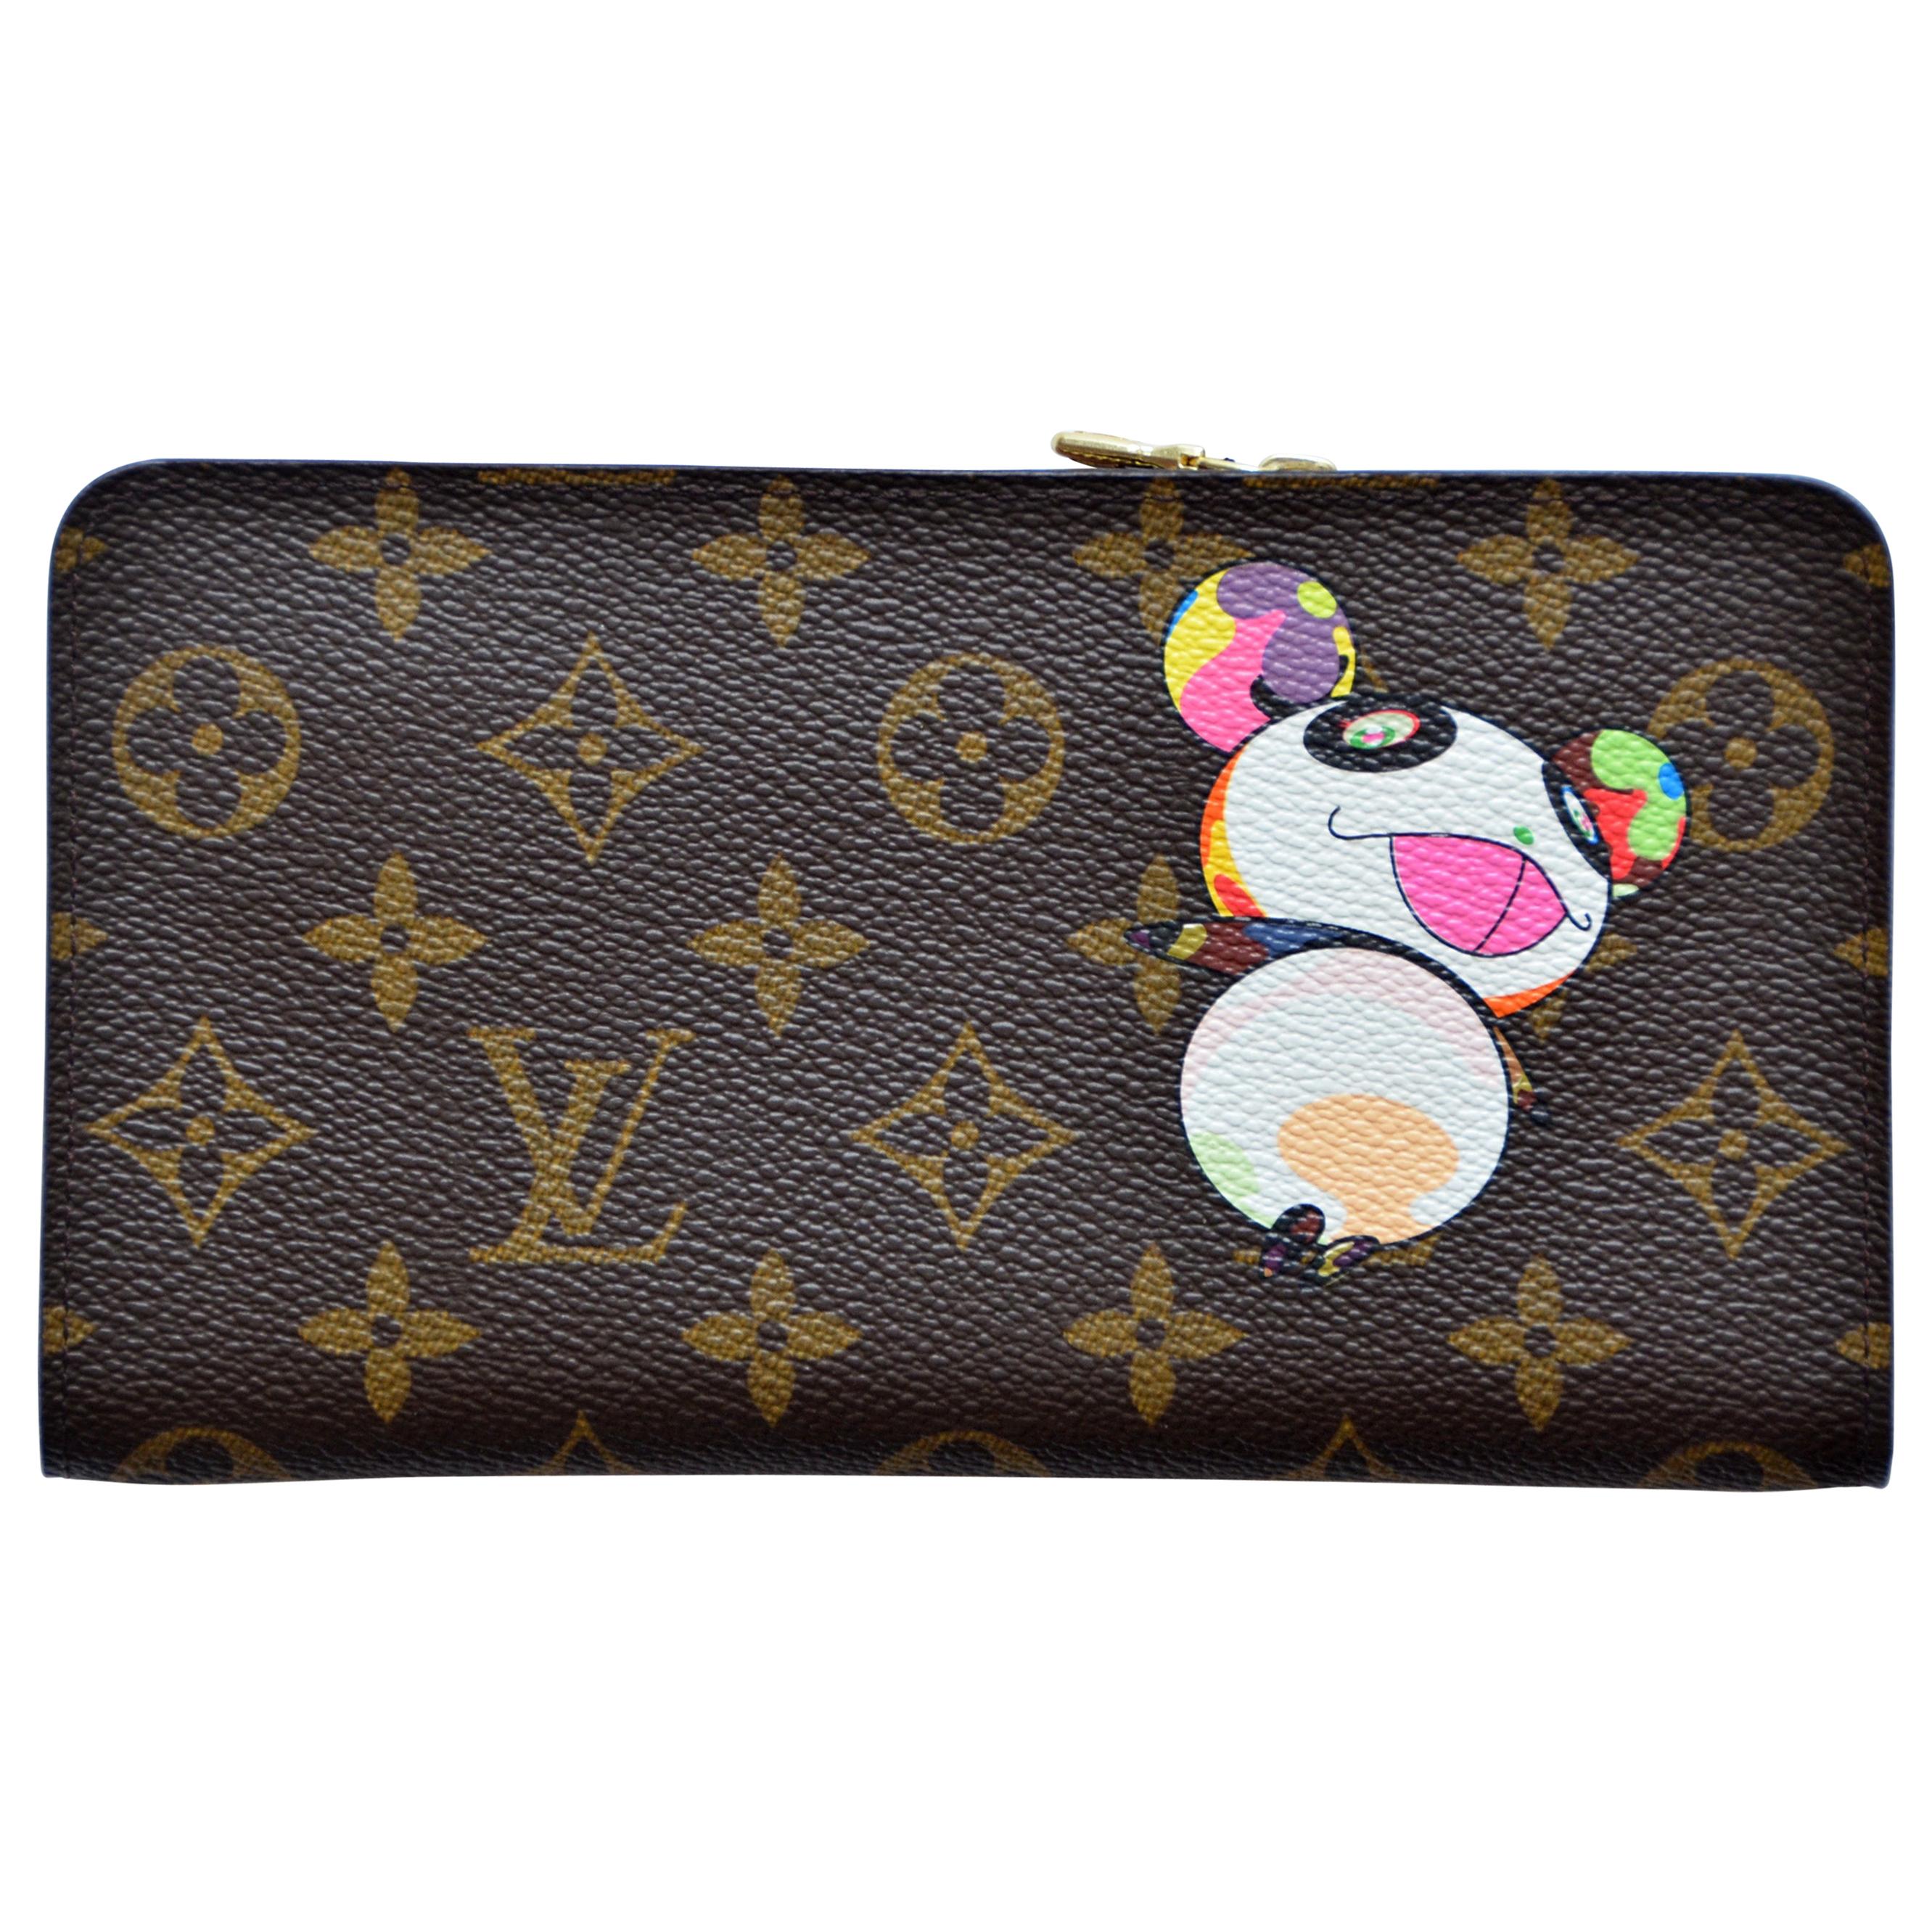 W2C this blue lv trio bag and a couple wallets. : r/Pandabuy